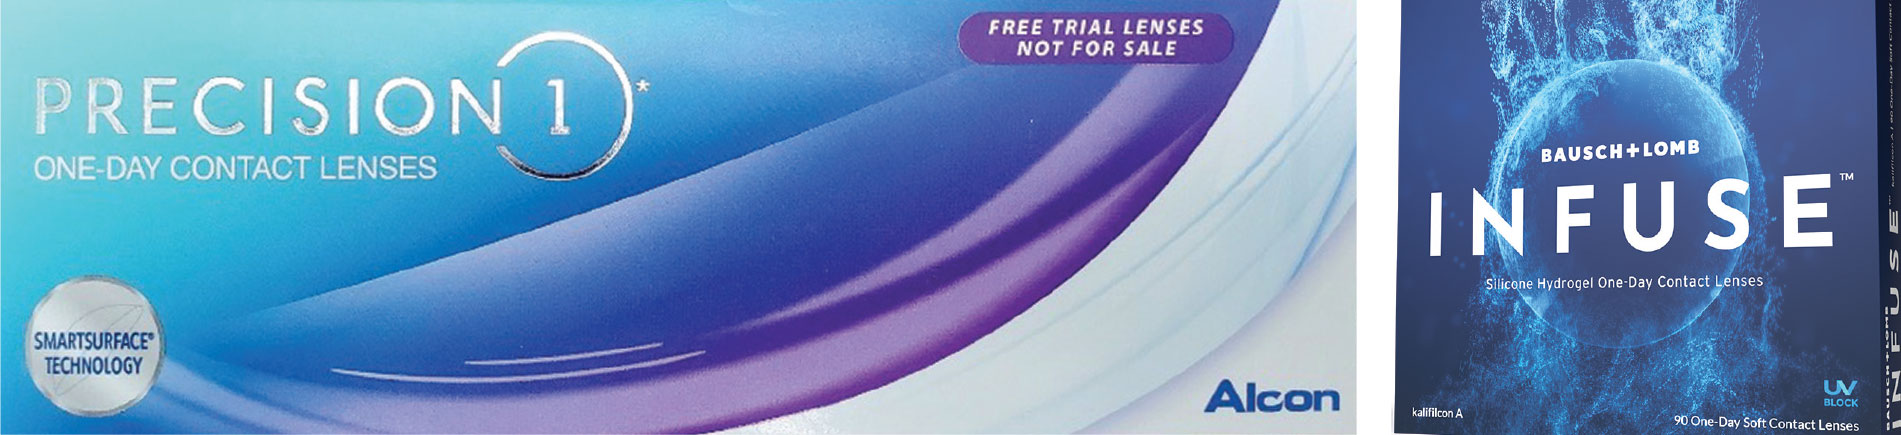 Novel daily replacement lenses can alleviate issues that drive dropout.